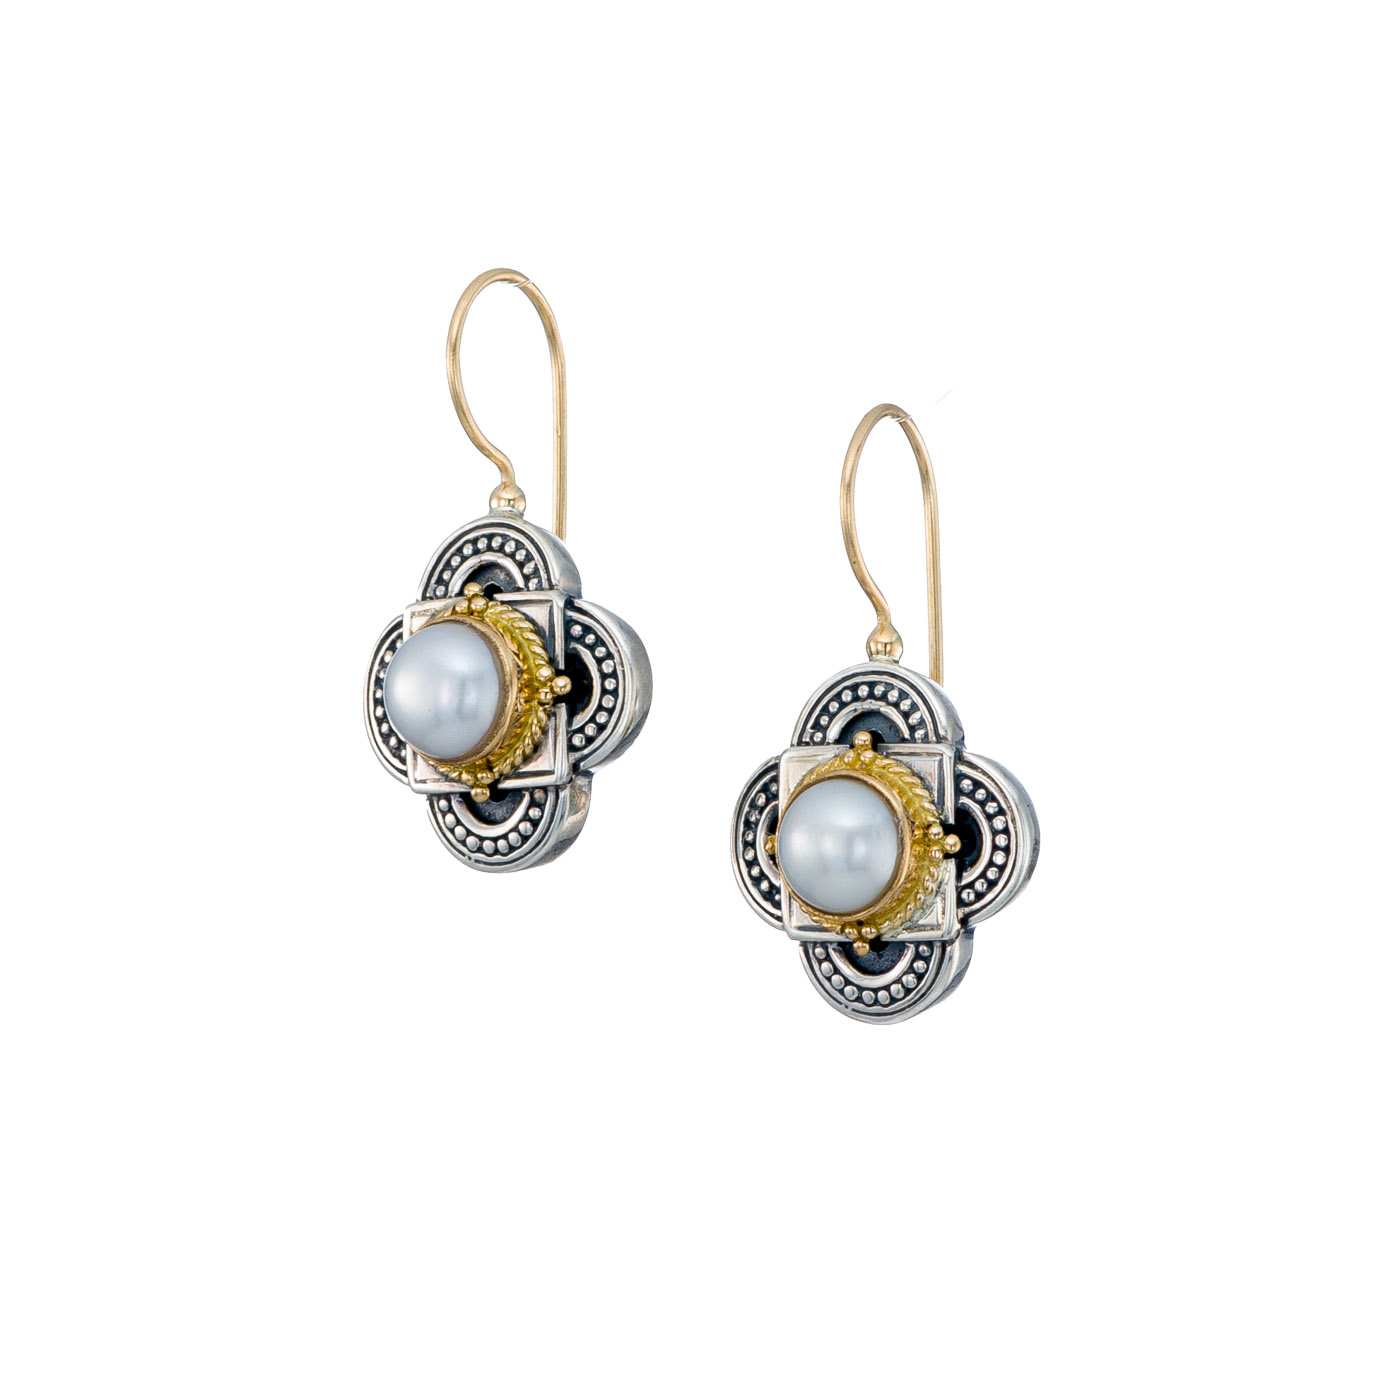 Cyclades earrings in 18K Gold and Sterling silver with pearls